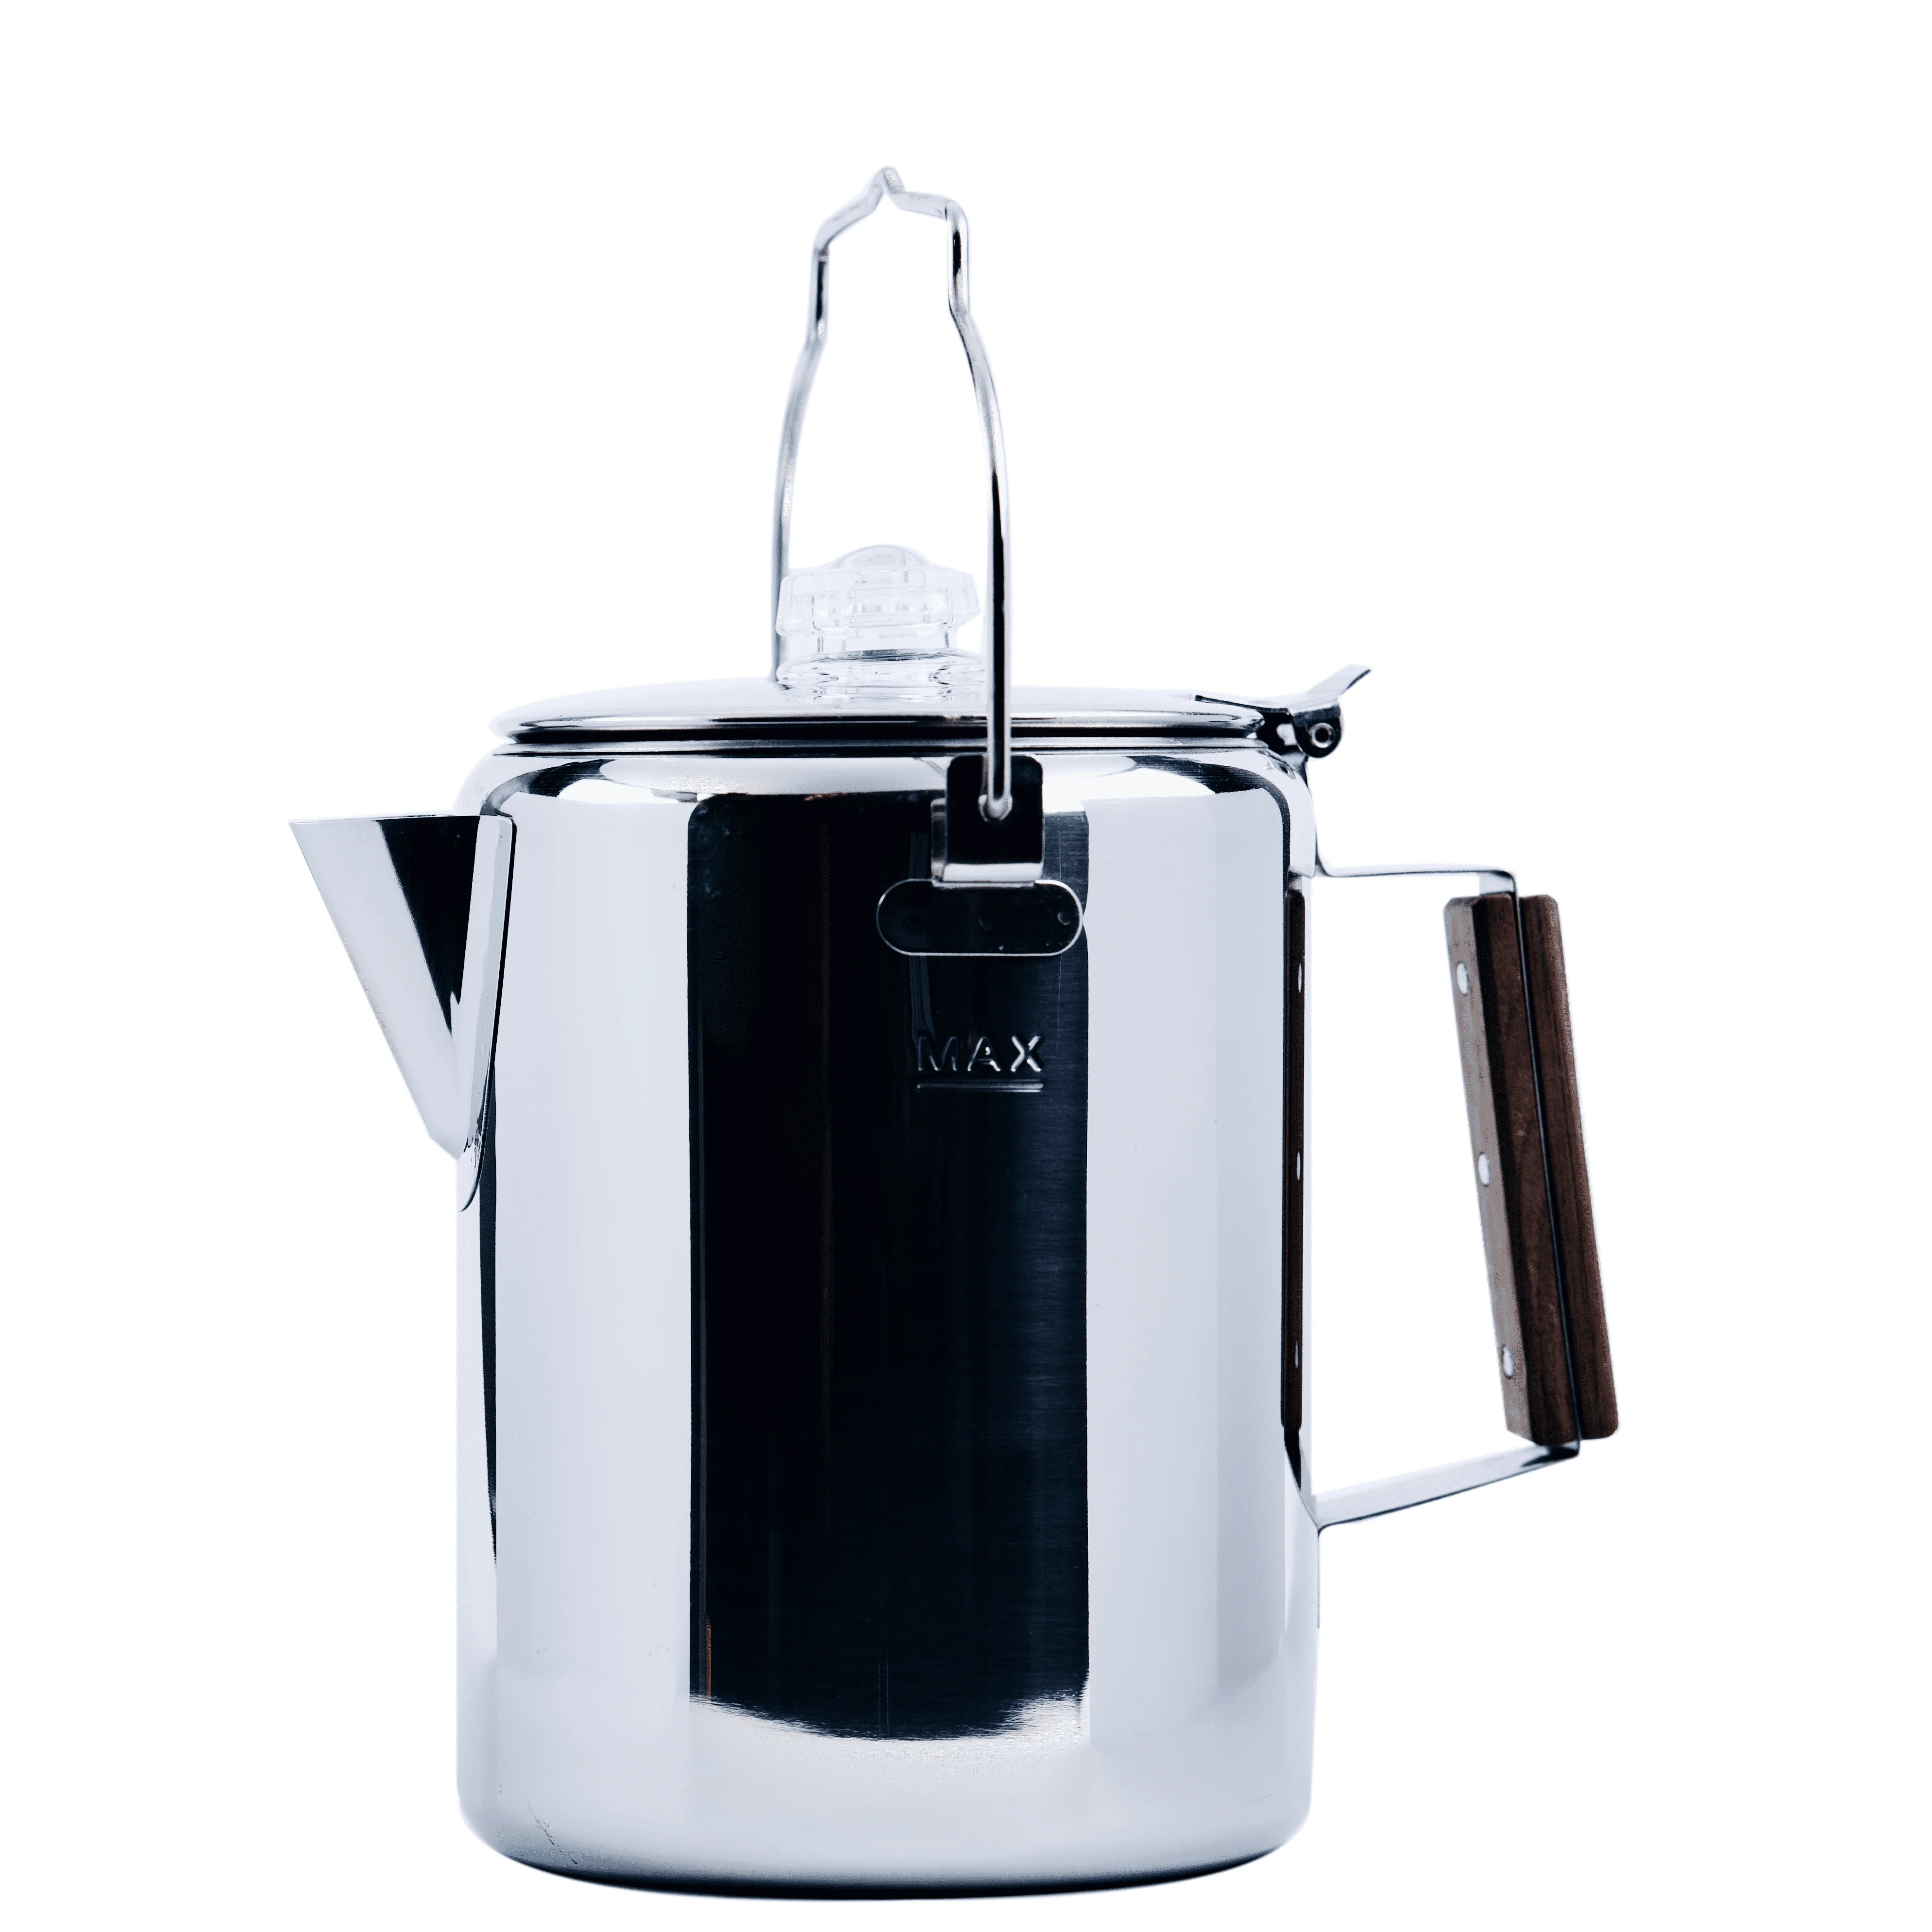 

Stainless Steel 12-Cup Percolator